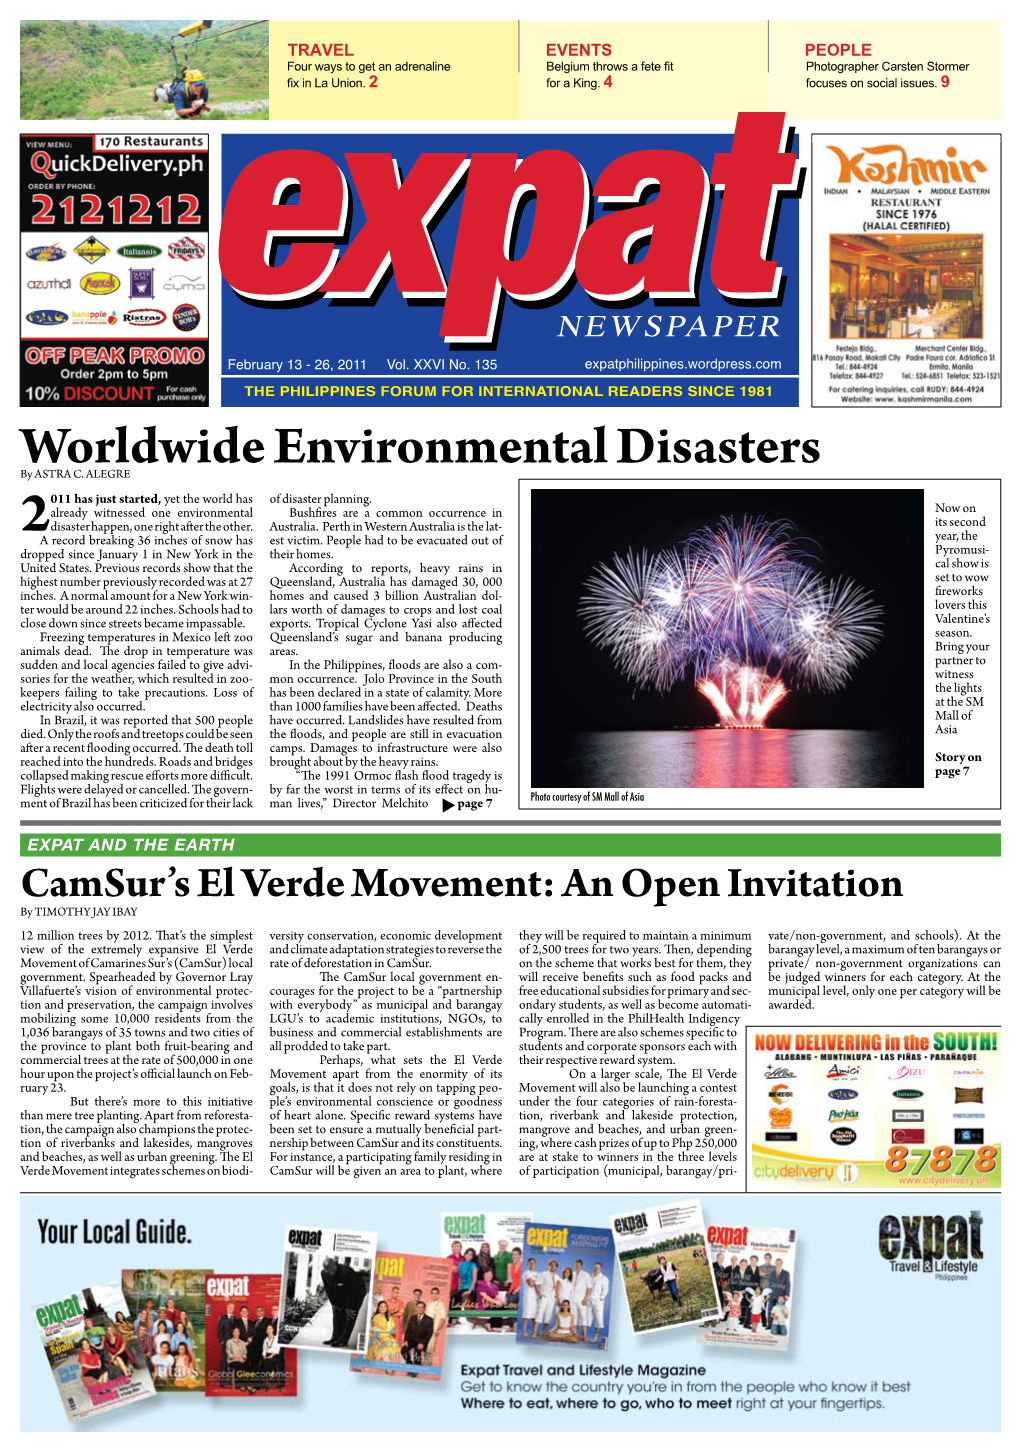 Worldwide Environmental Disasters… Industry, Recognizes M